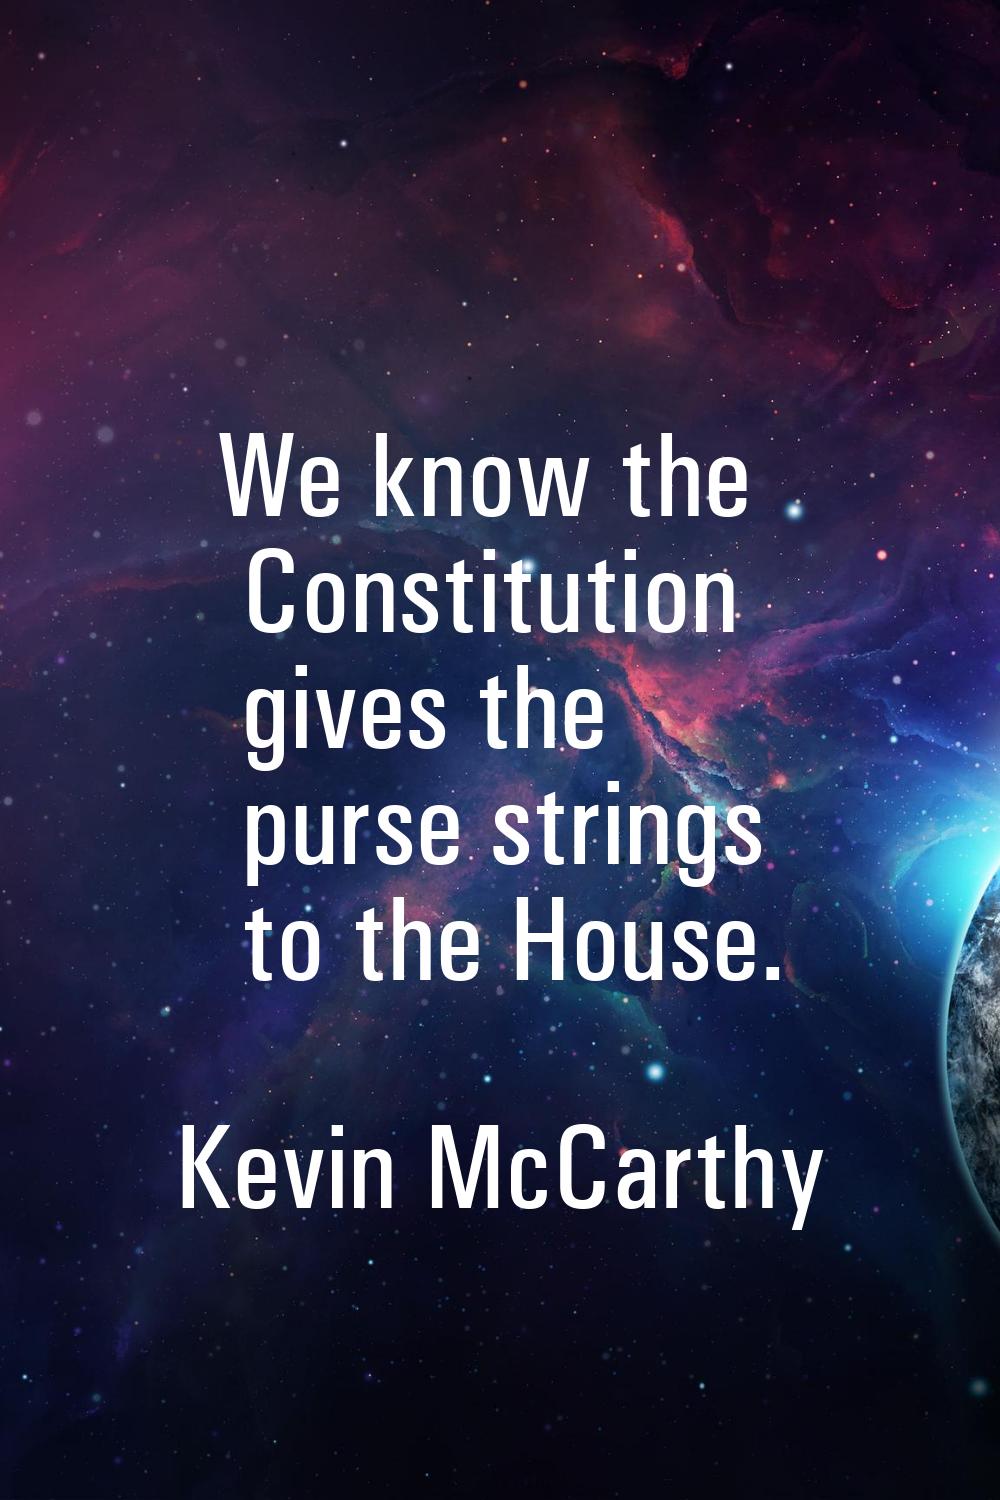 We know the Constitution gives the purse strings to the House.